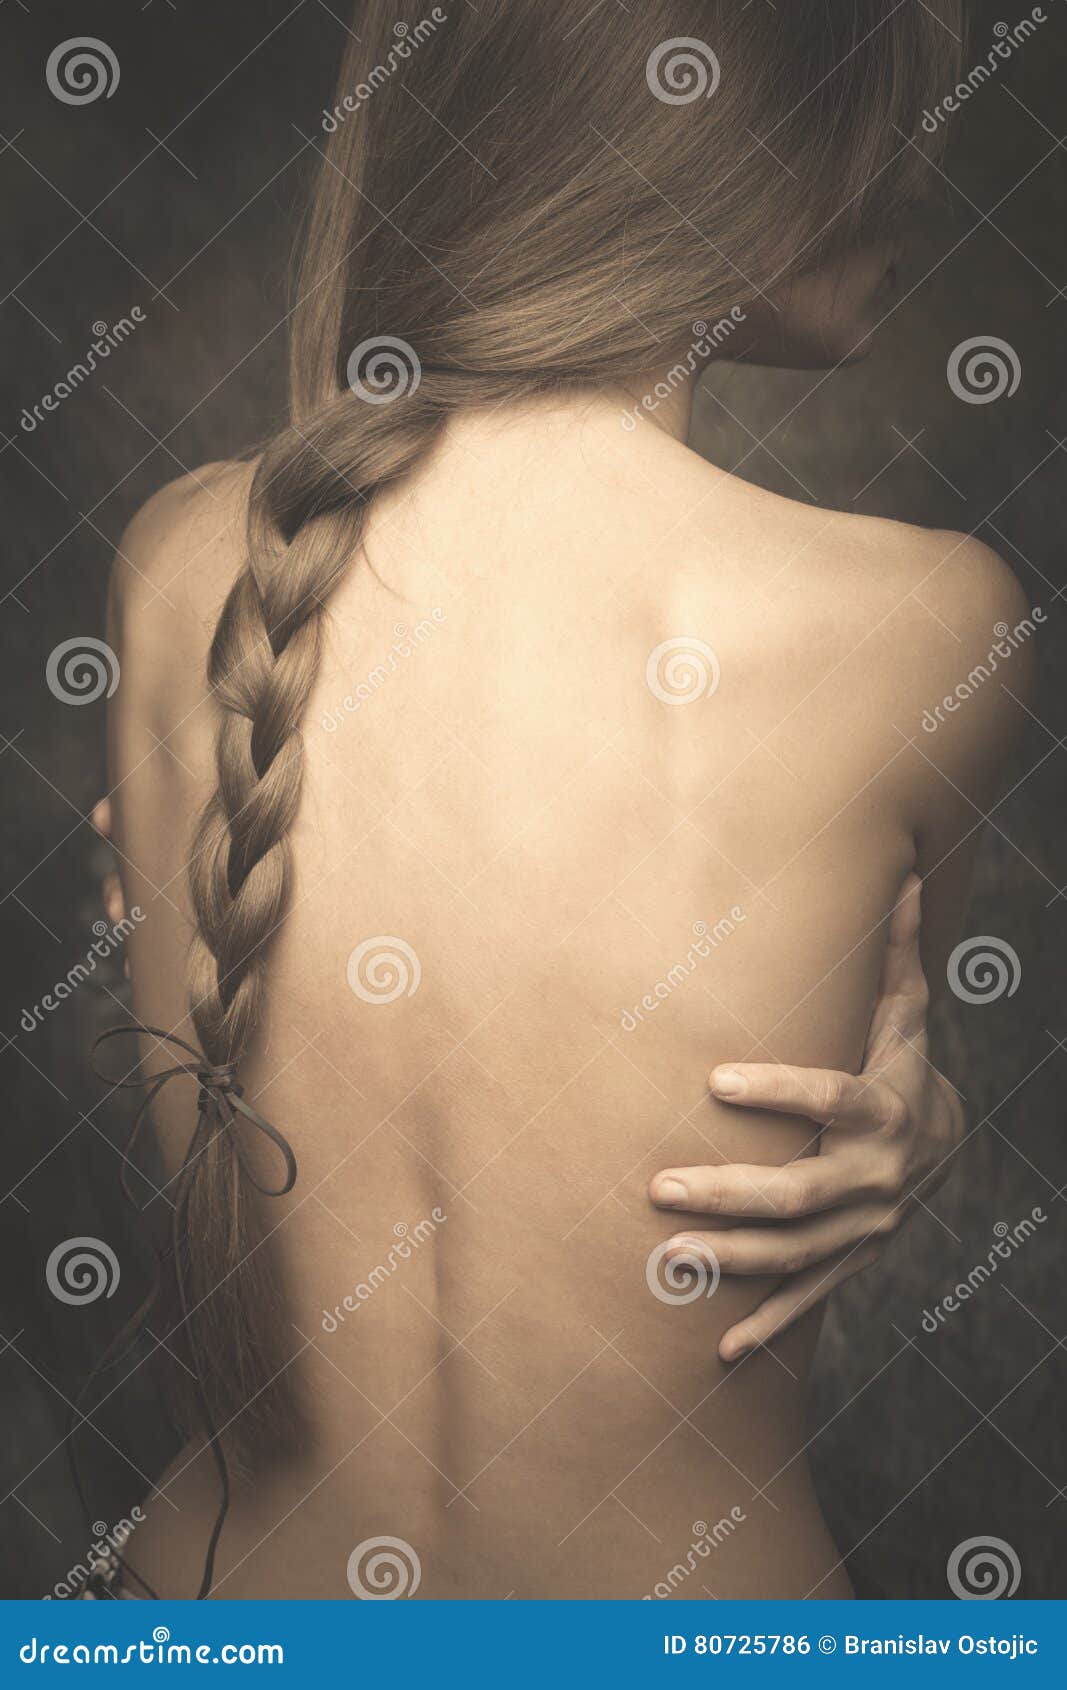 intimate woman portrait bare back and long braid